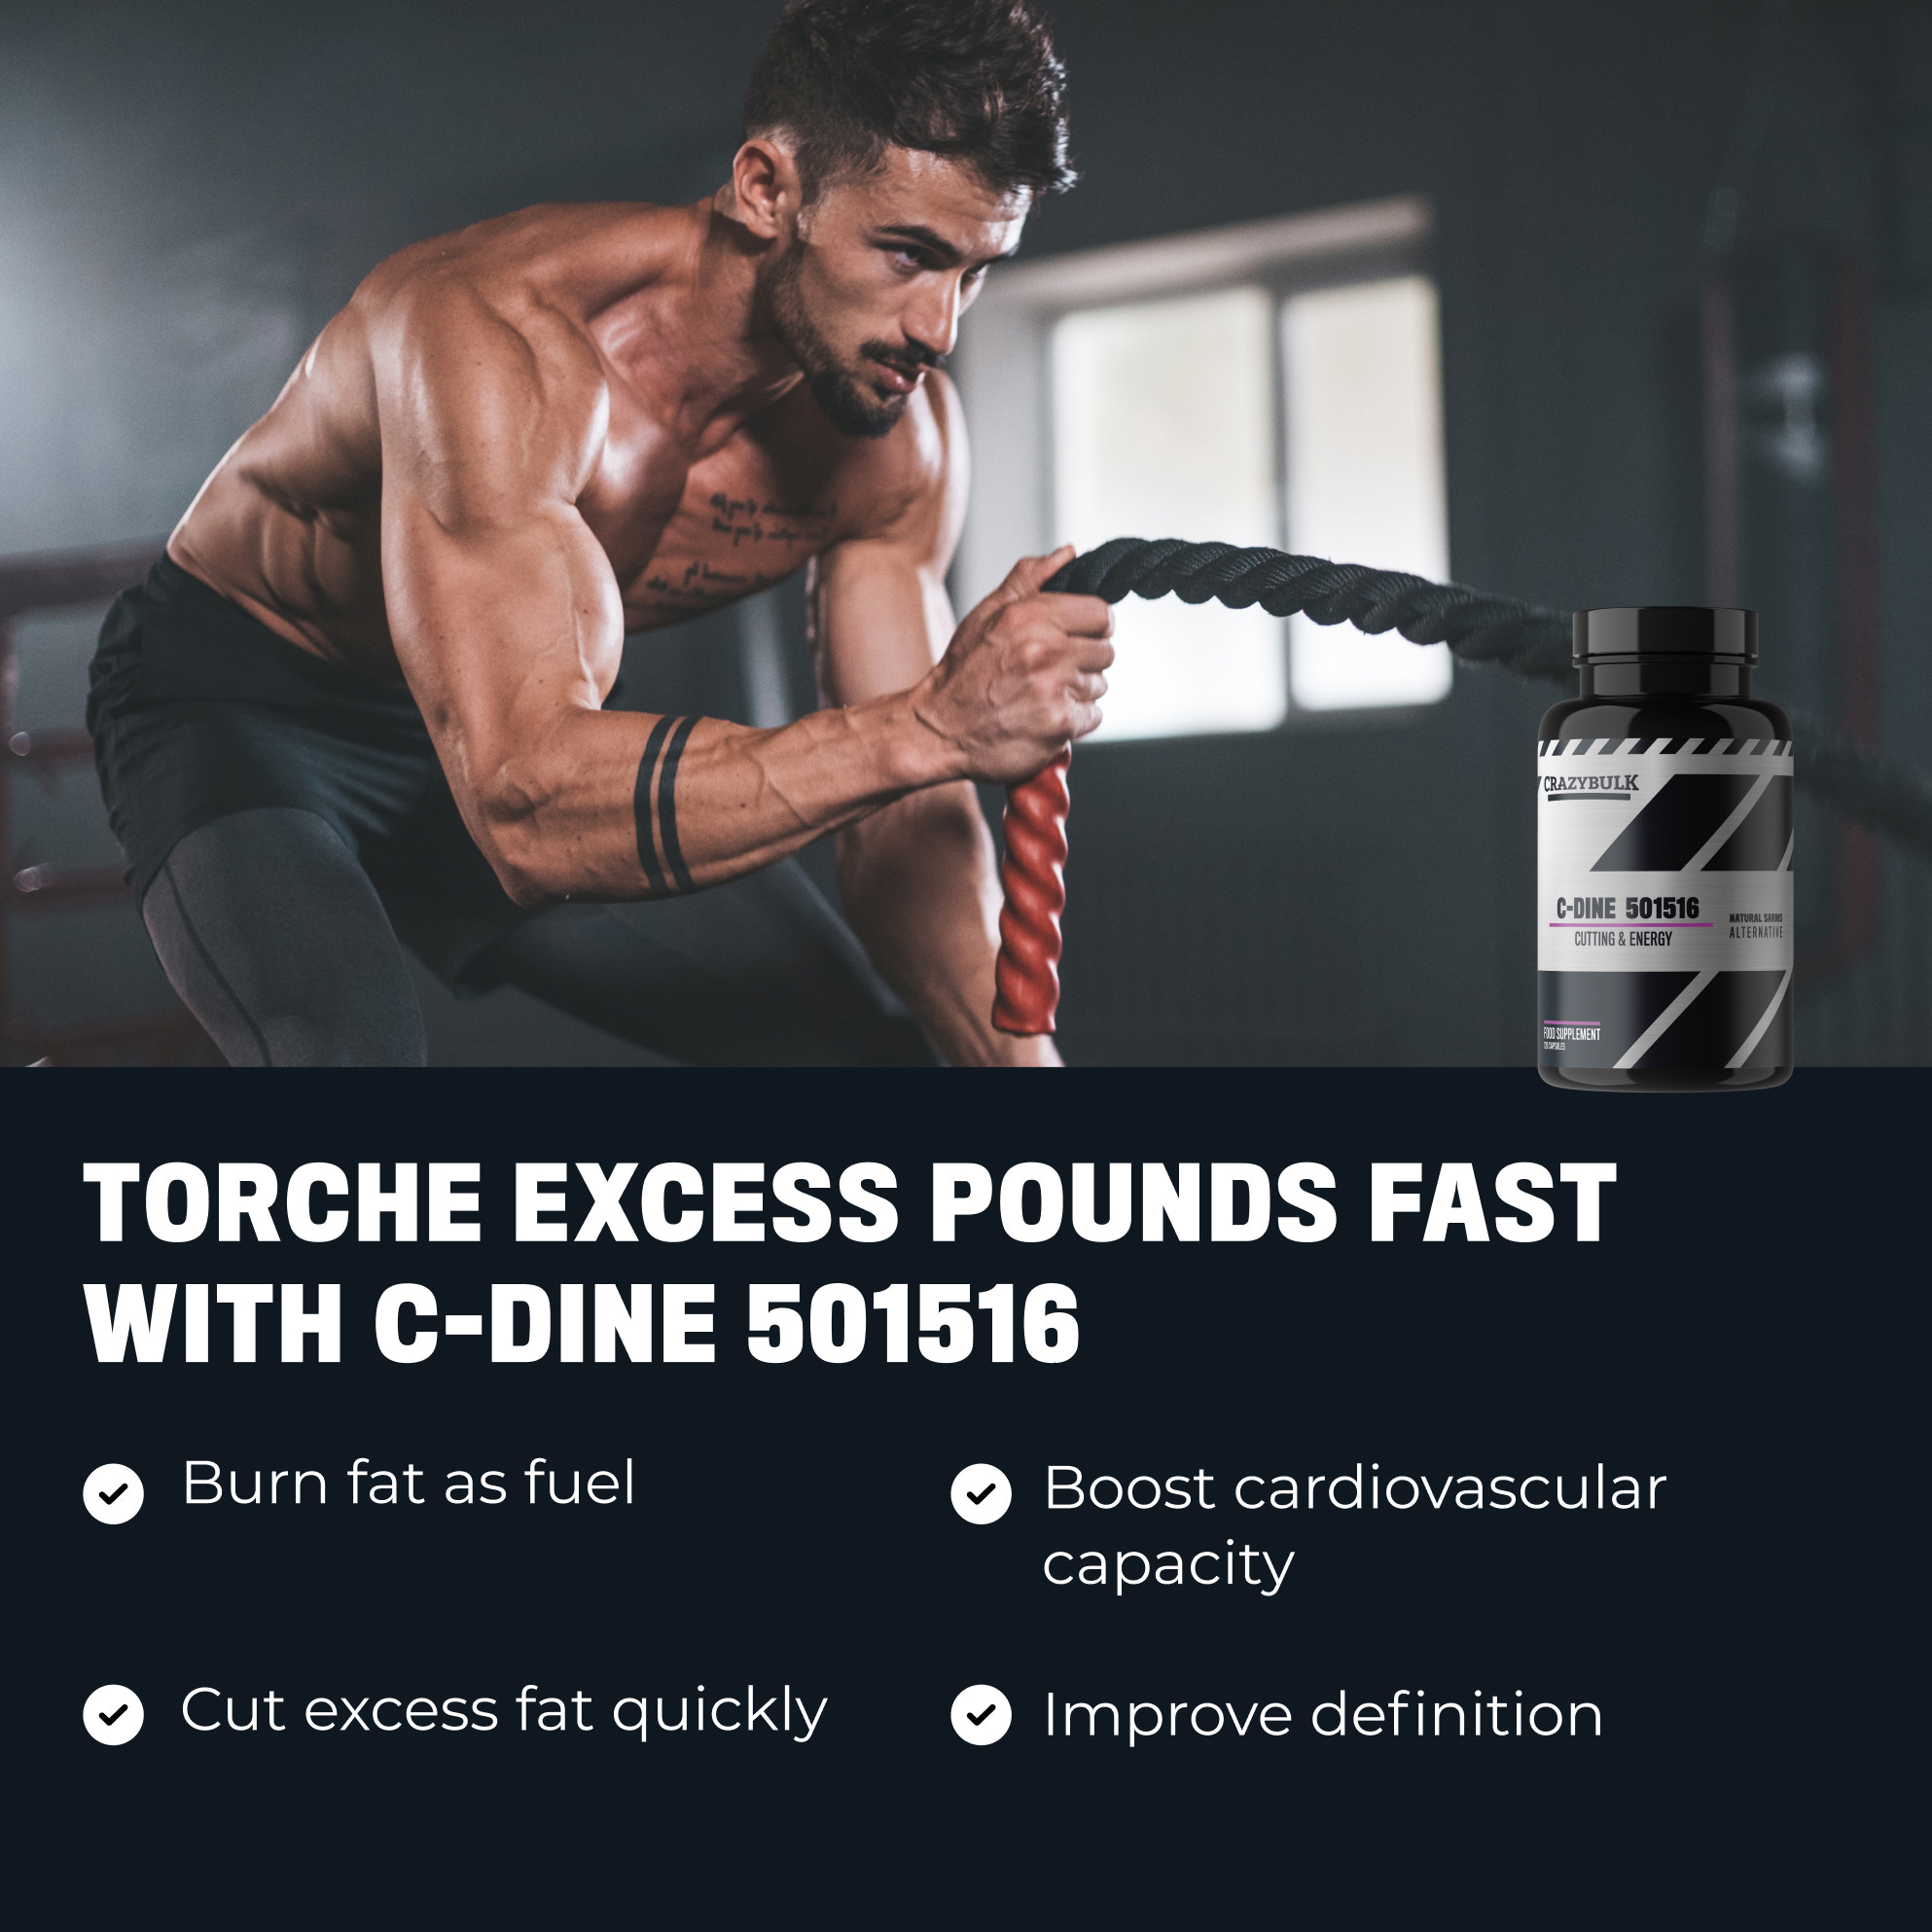 Torch Excess Pounds Fast with C-DIne 